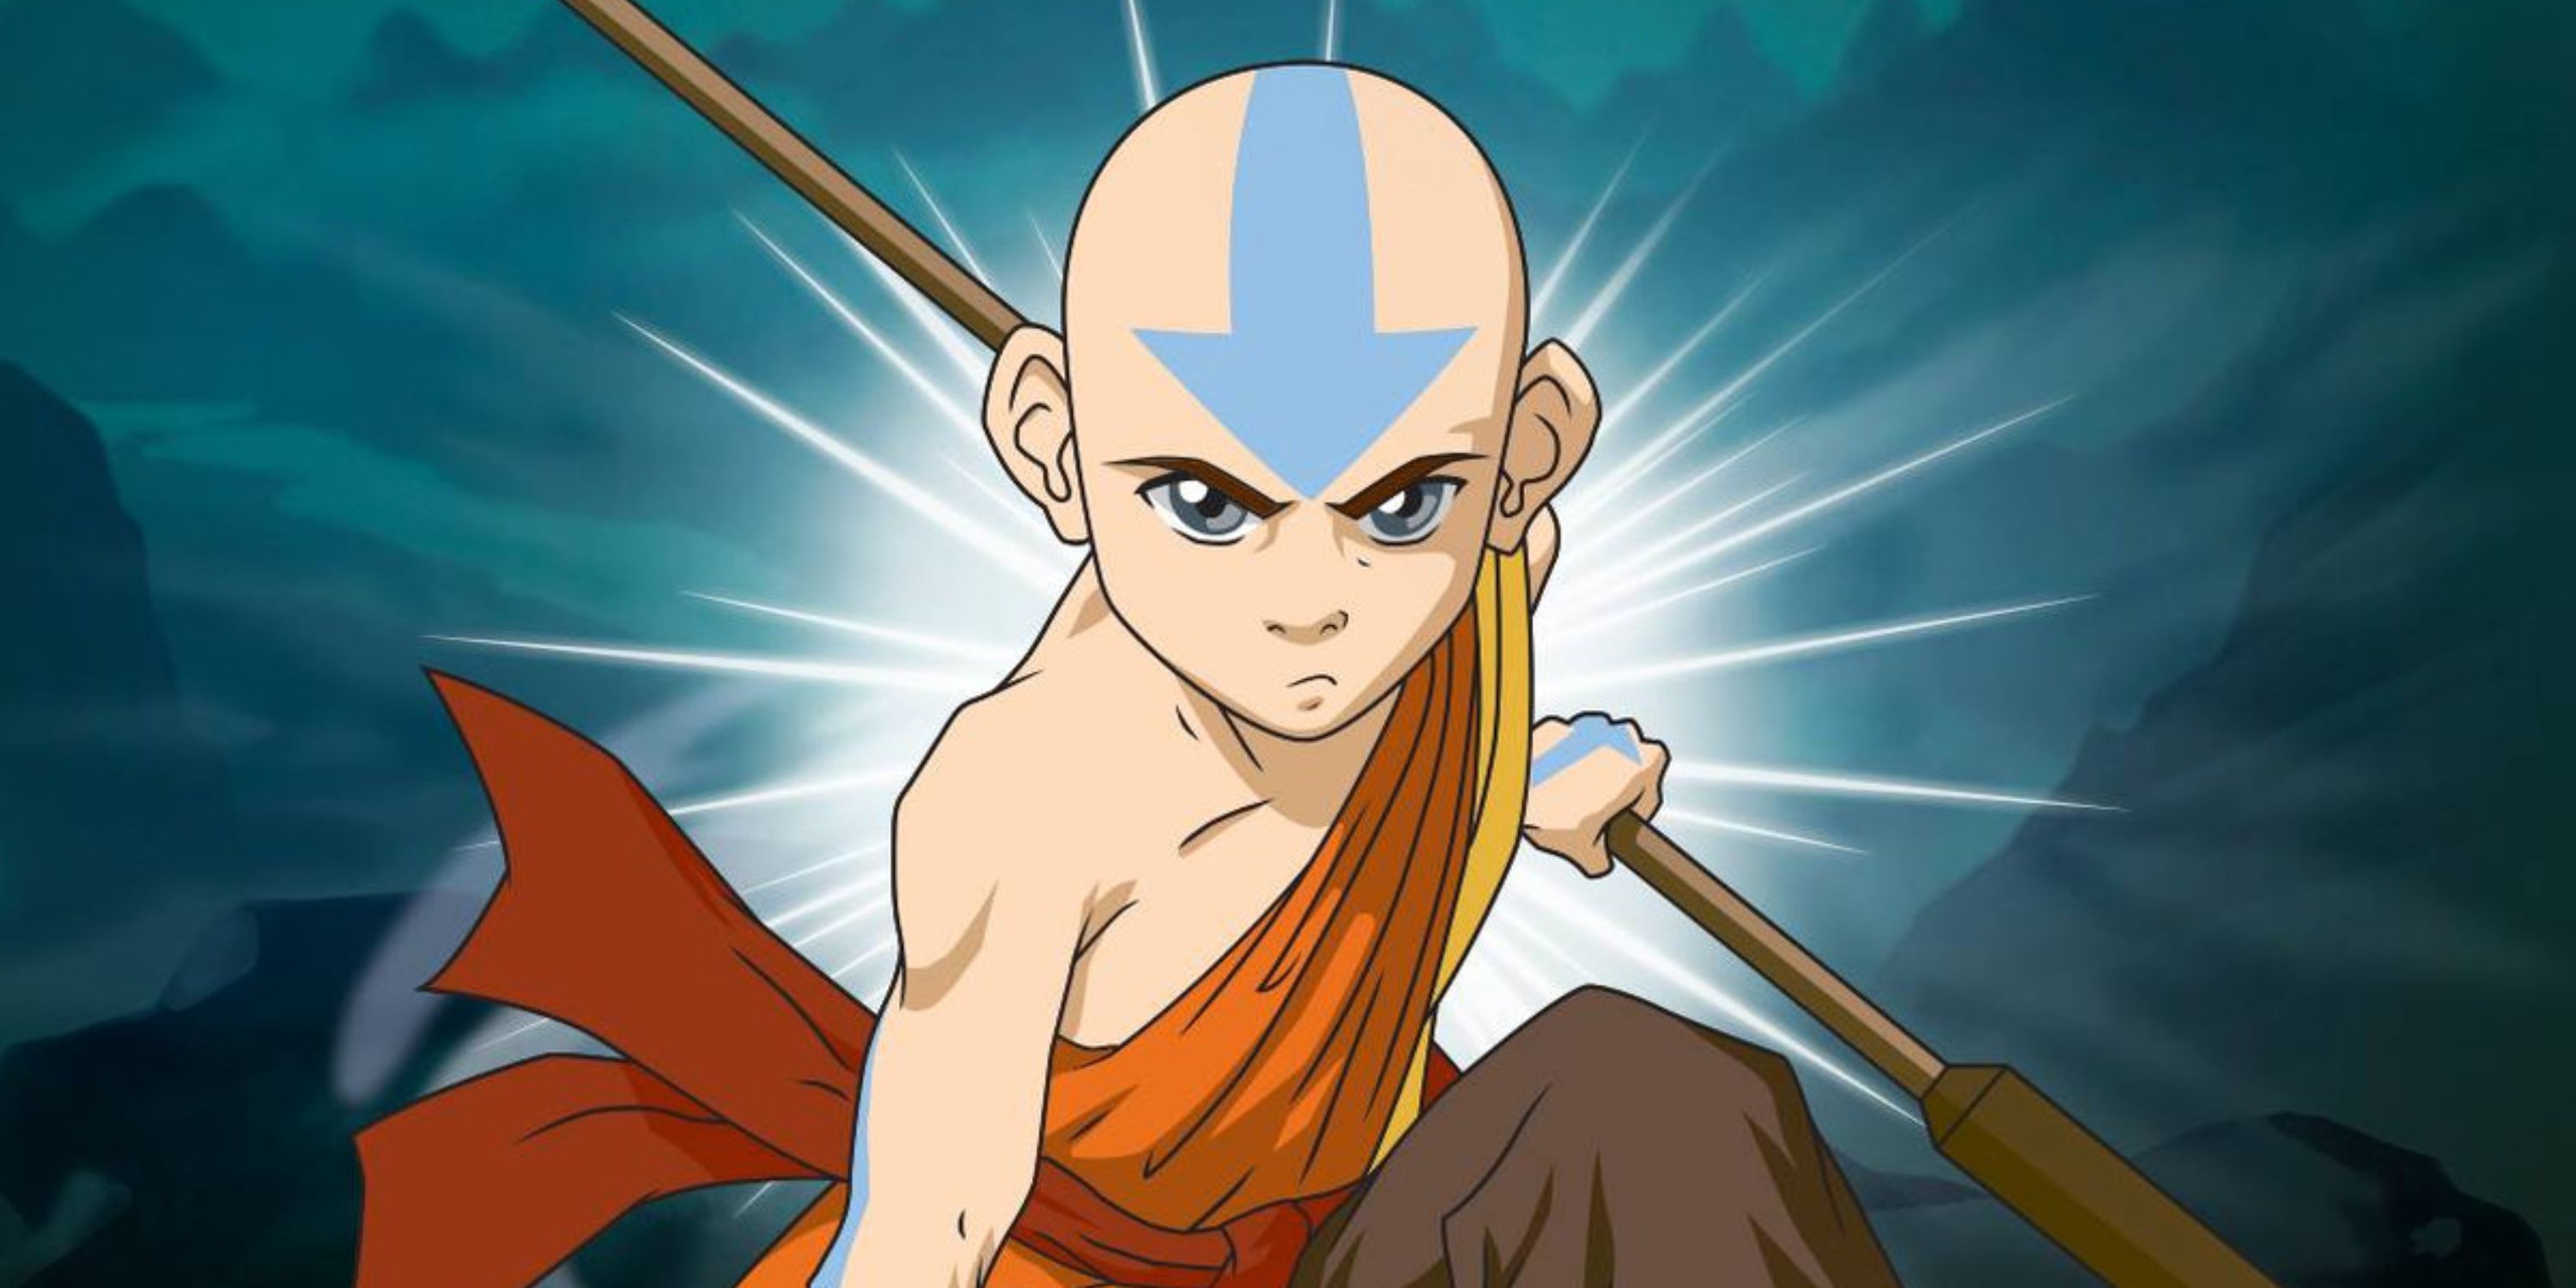 Avatar Aang promtional image from Avatar The Last Airbender